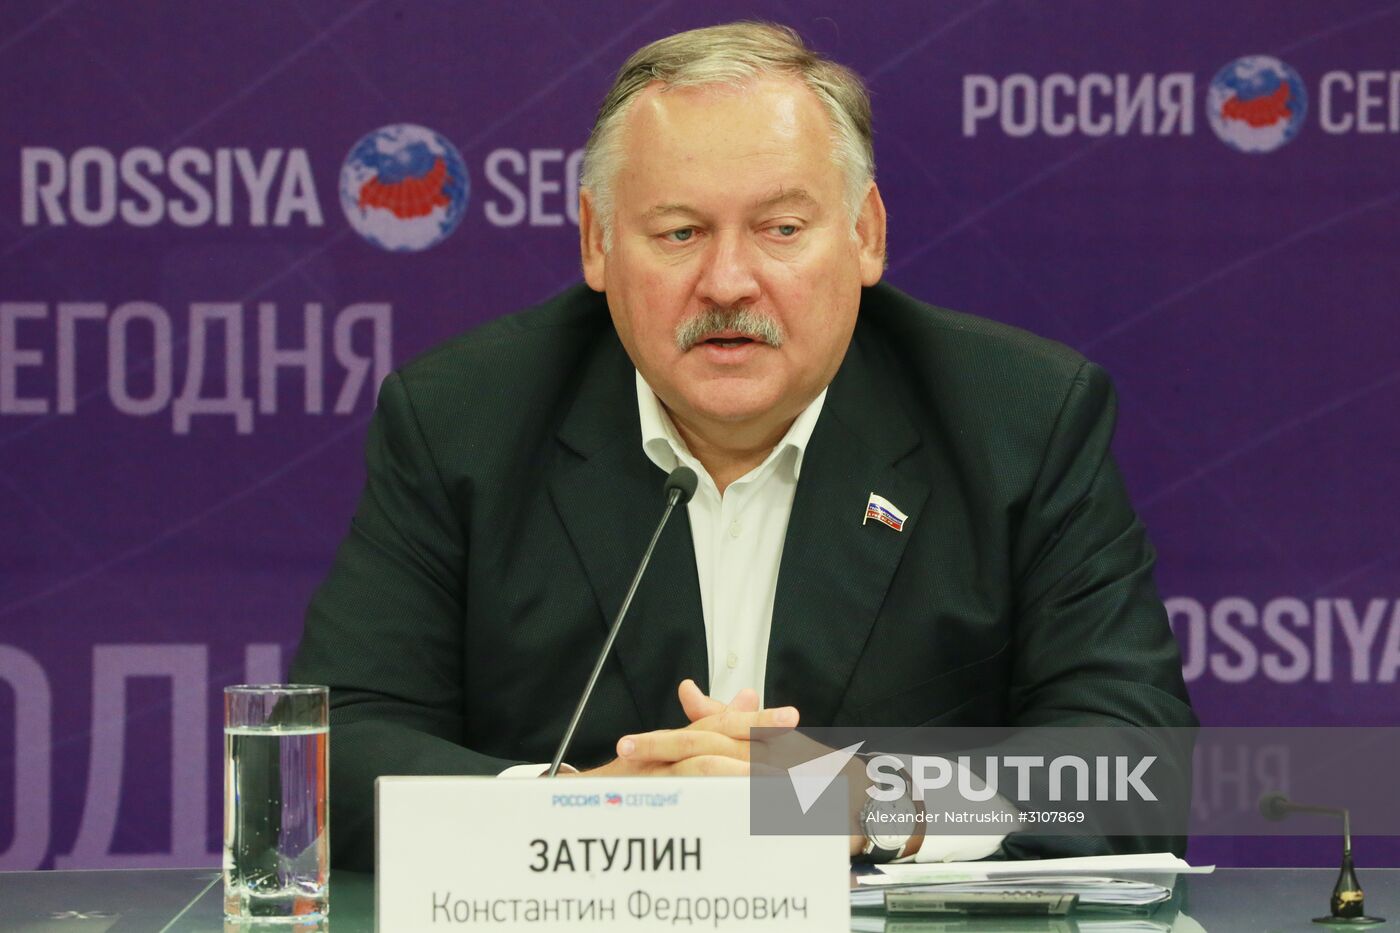 News conference with Konstantin Zatulin, First Deputy Chairman of the State Duma Committee for CIS Affairs